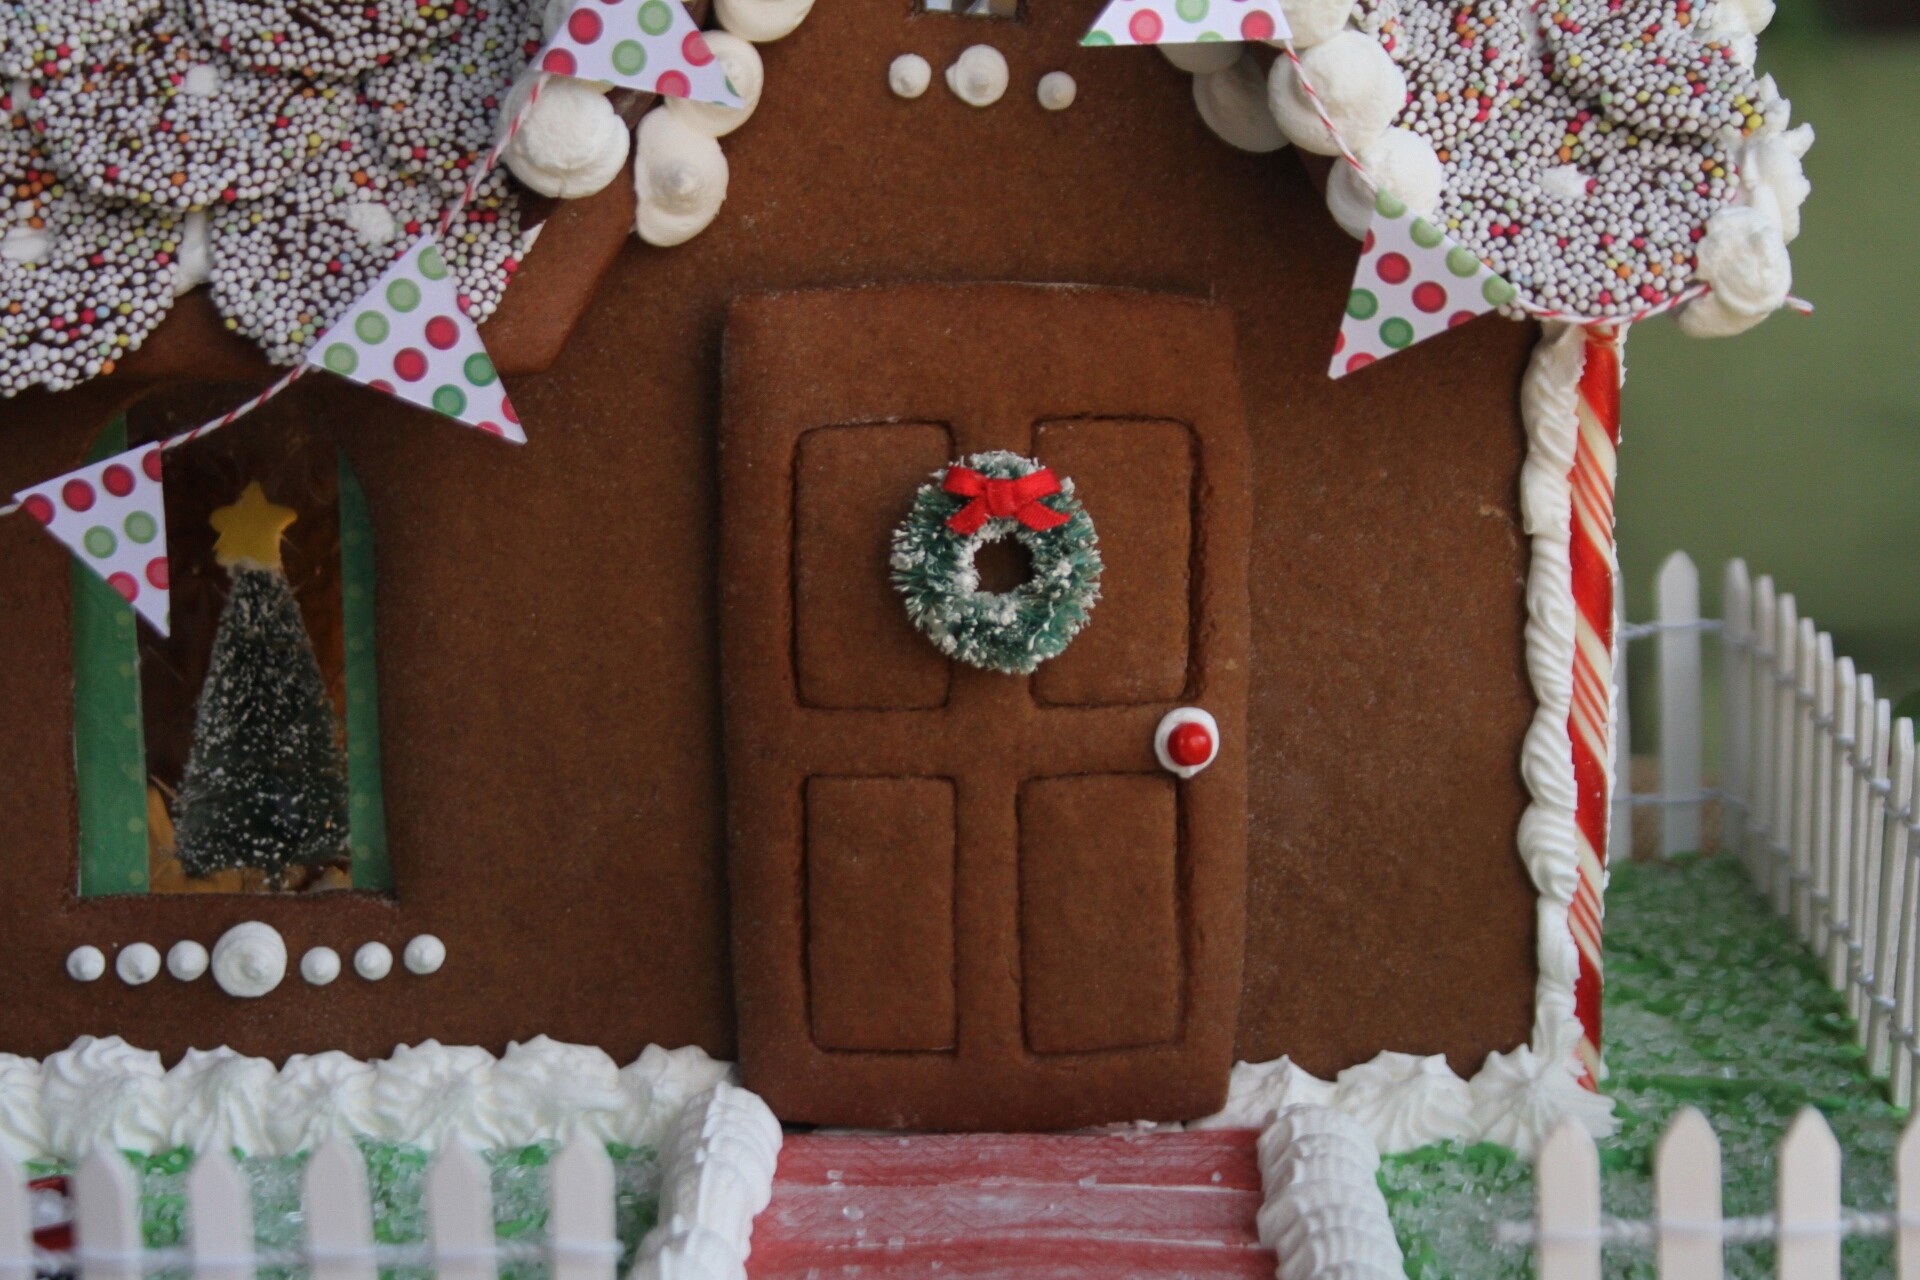 Festive gingerbread house, Christmas decoration, High-resolution wallpaper, Cozy and inviting, 1920x1280 HD Desktop